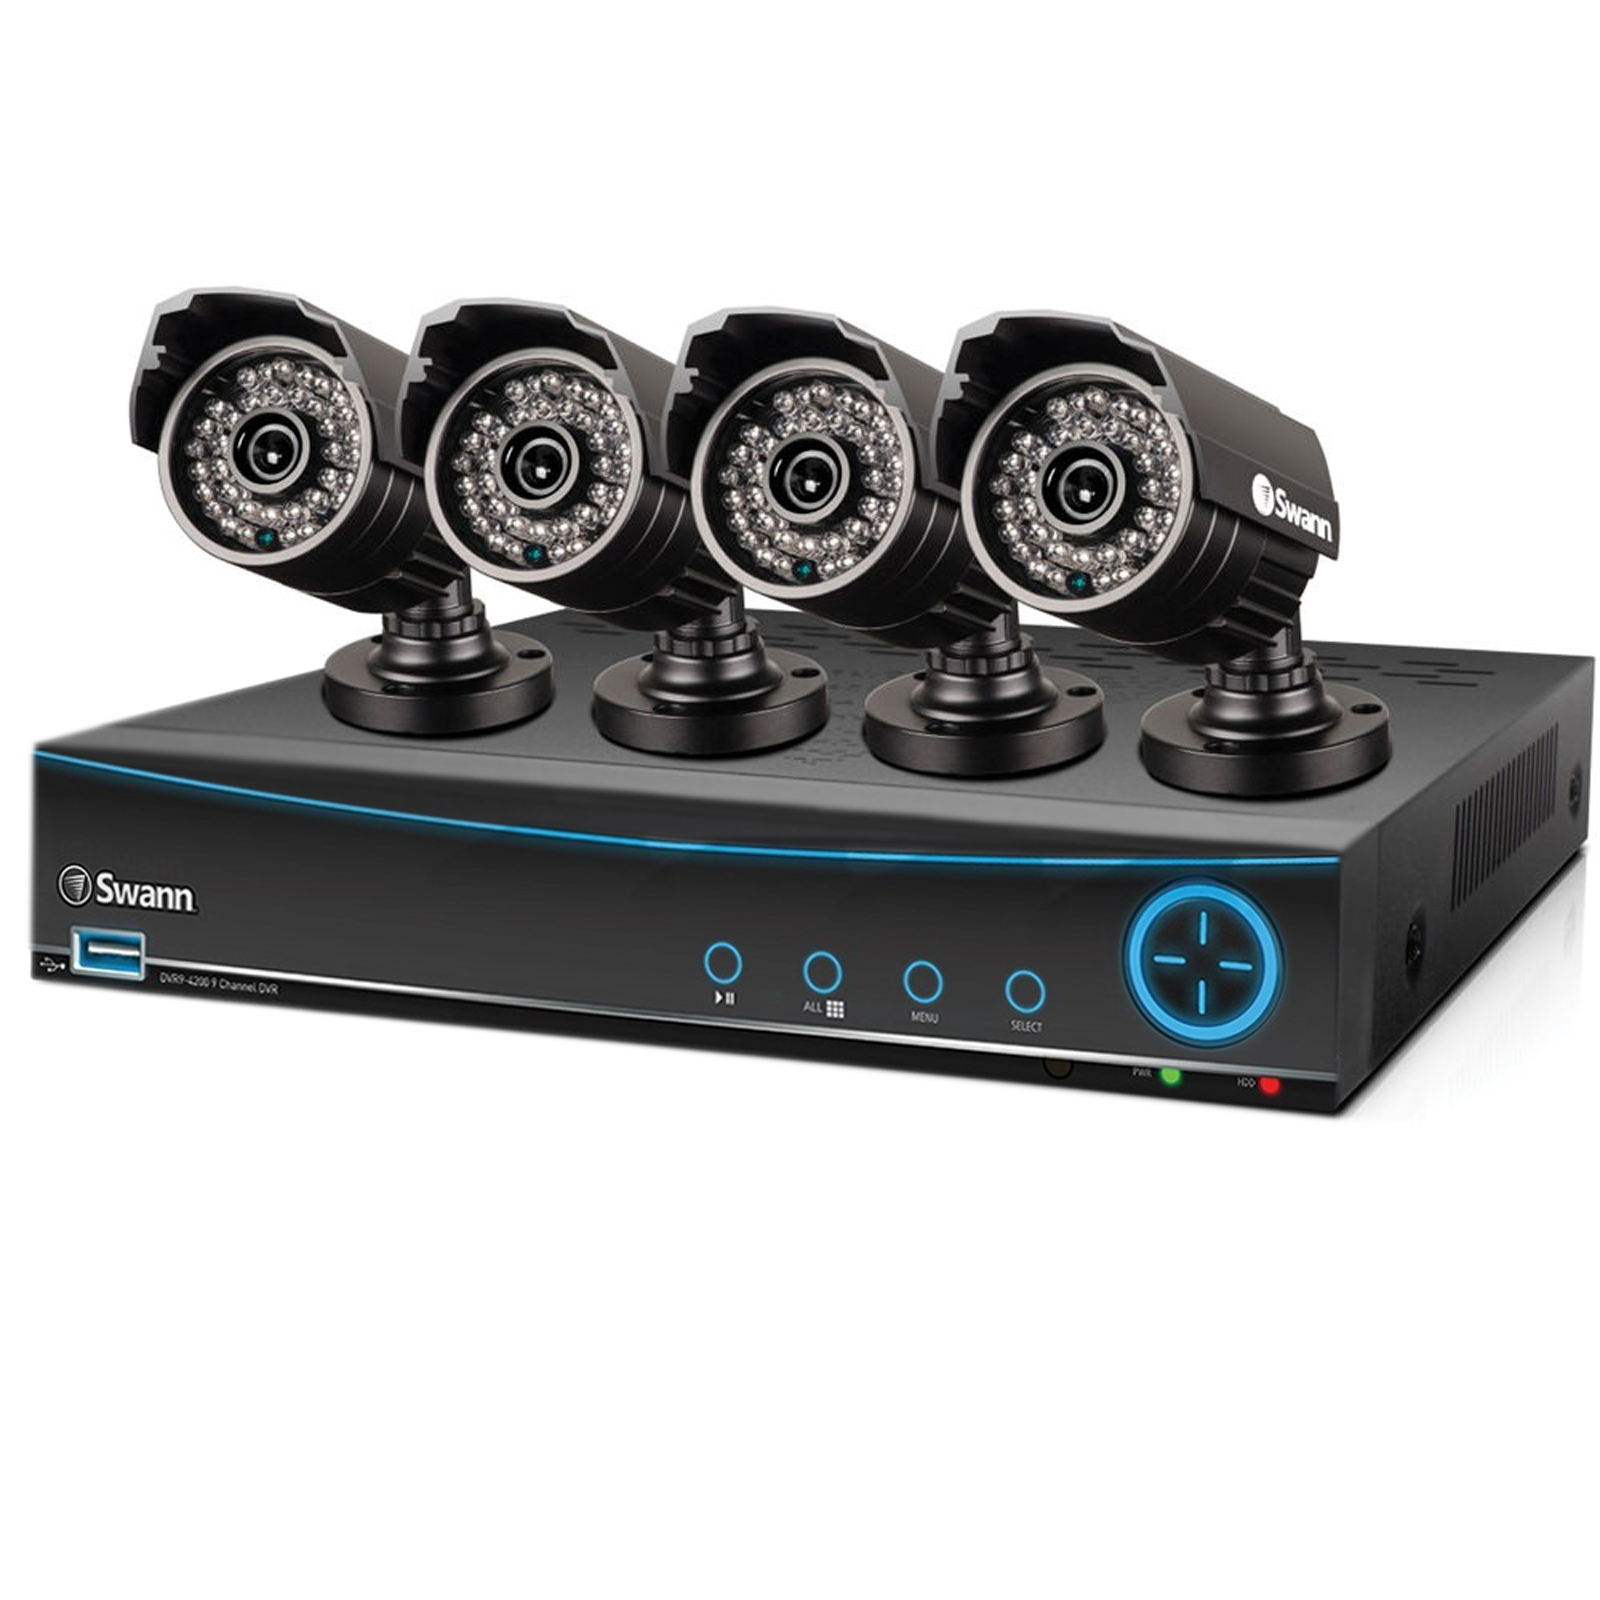 DVR8-3200 8-Channel 960H Digital Video Recorder and 4 PRO-642 Camera System